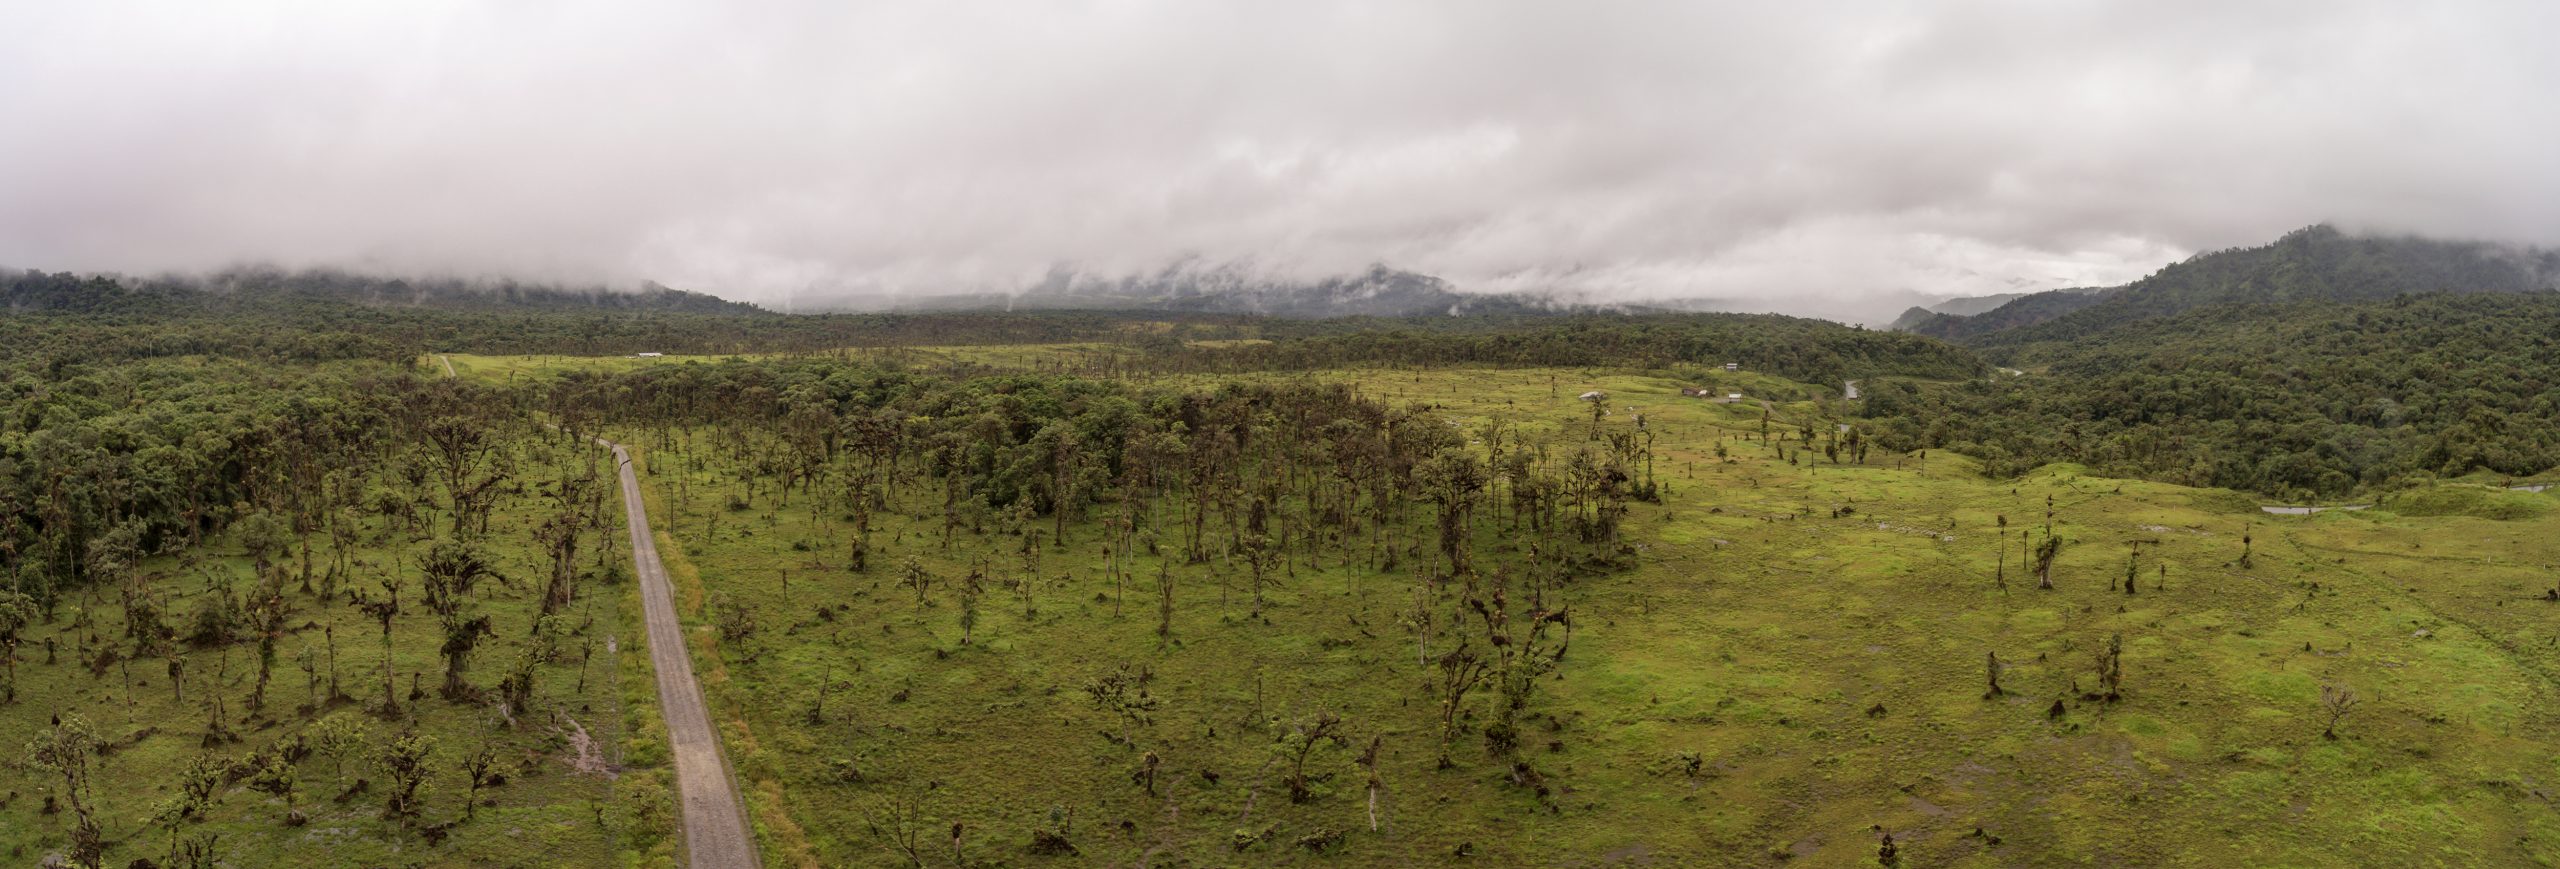 Aerial view of deforestation along a road cut through montane rainforest on the Amazonian slopes of the Andes in Ecuador. The forest is being cleared for cattle farming.